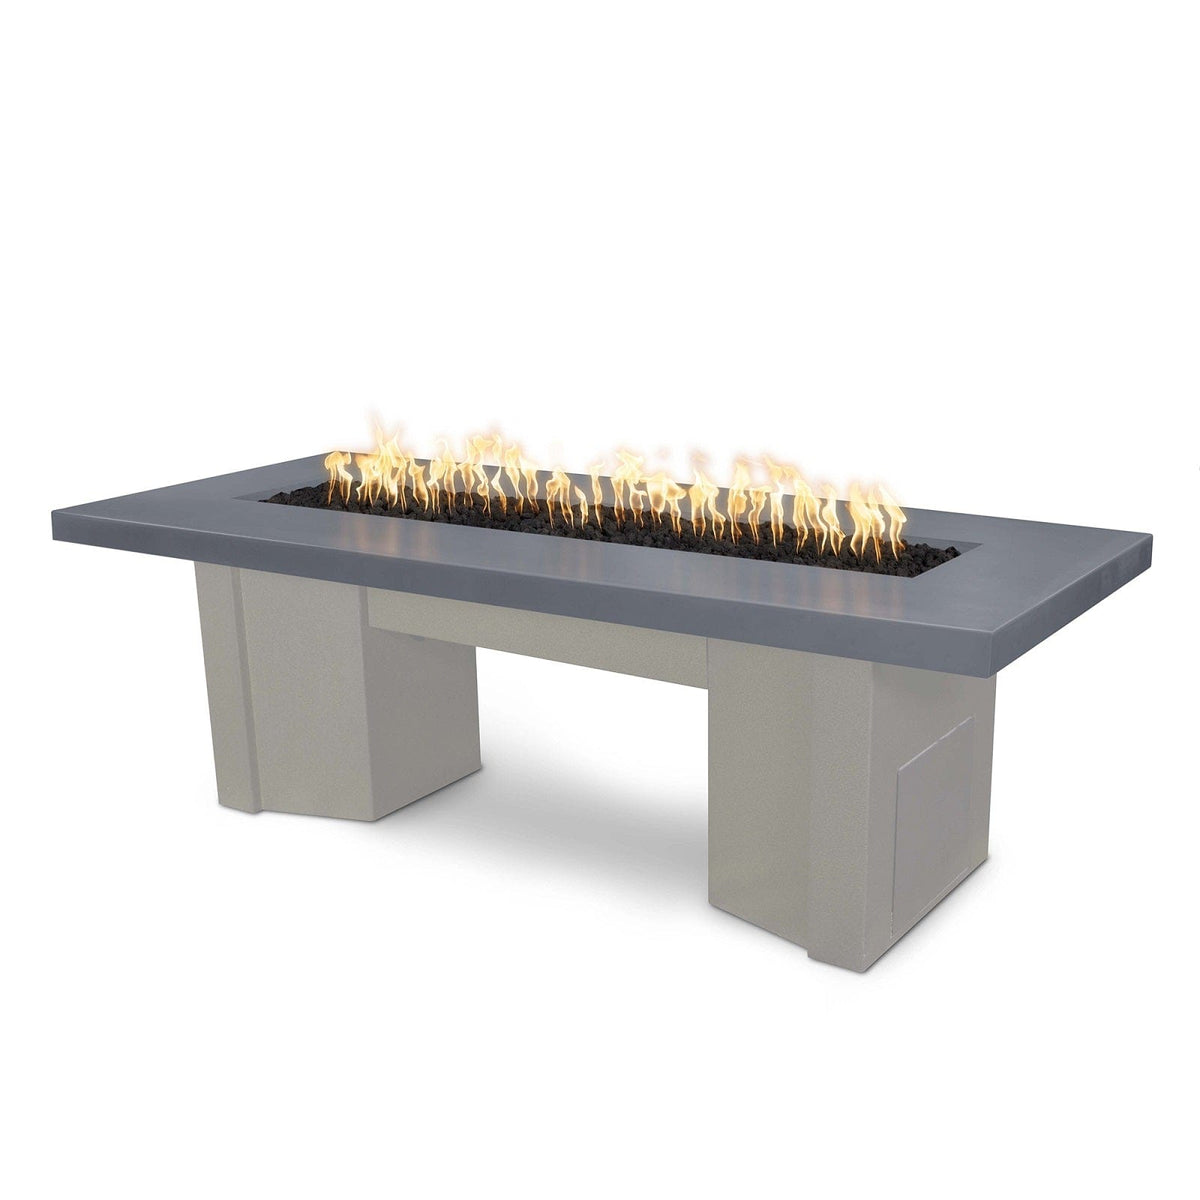 The Outdoor Plus Fire Features Gray (-GRY) / Pewter Powder Coated Steel (-PEW) The Outdoor Plus 60&quot; Alameda Fire Table Smooth Concrete in Natural Gas - Match Lit with Flame Sense System / OPT-ALMGFRC60FSML-NG